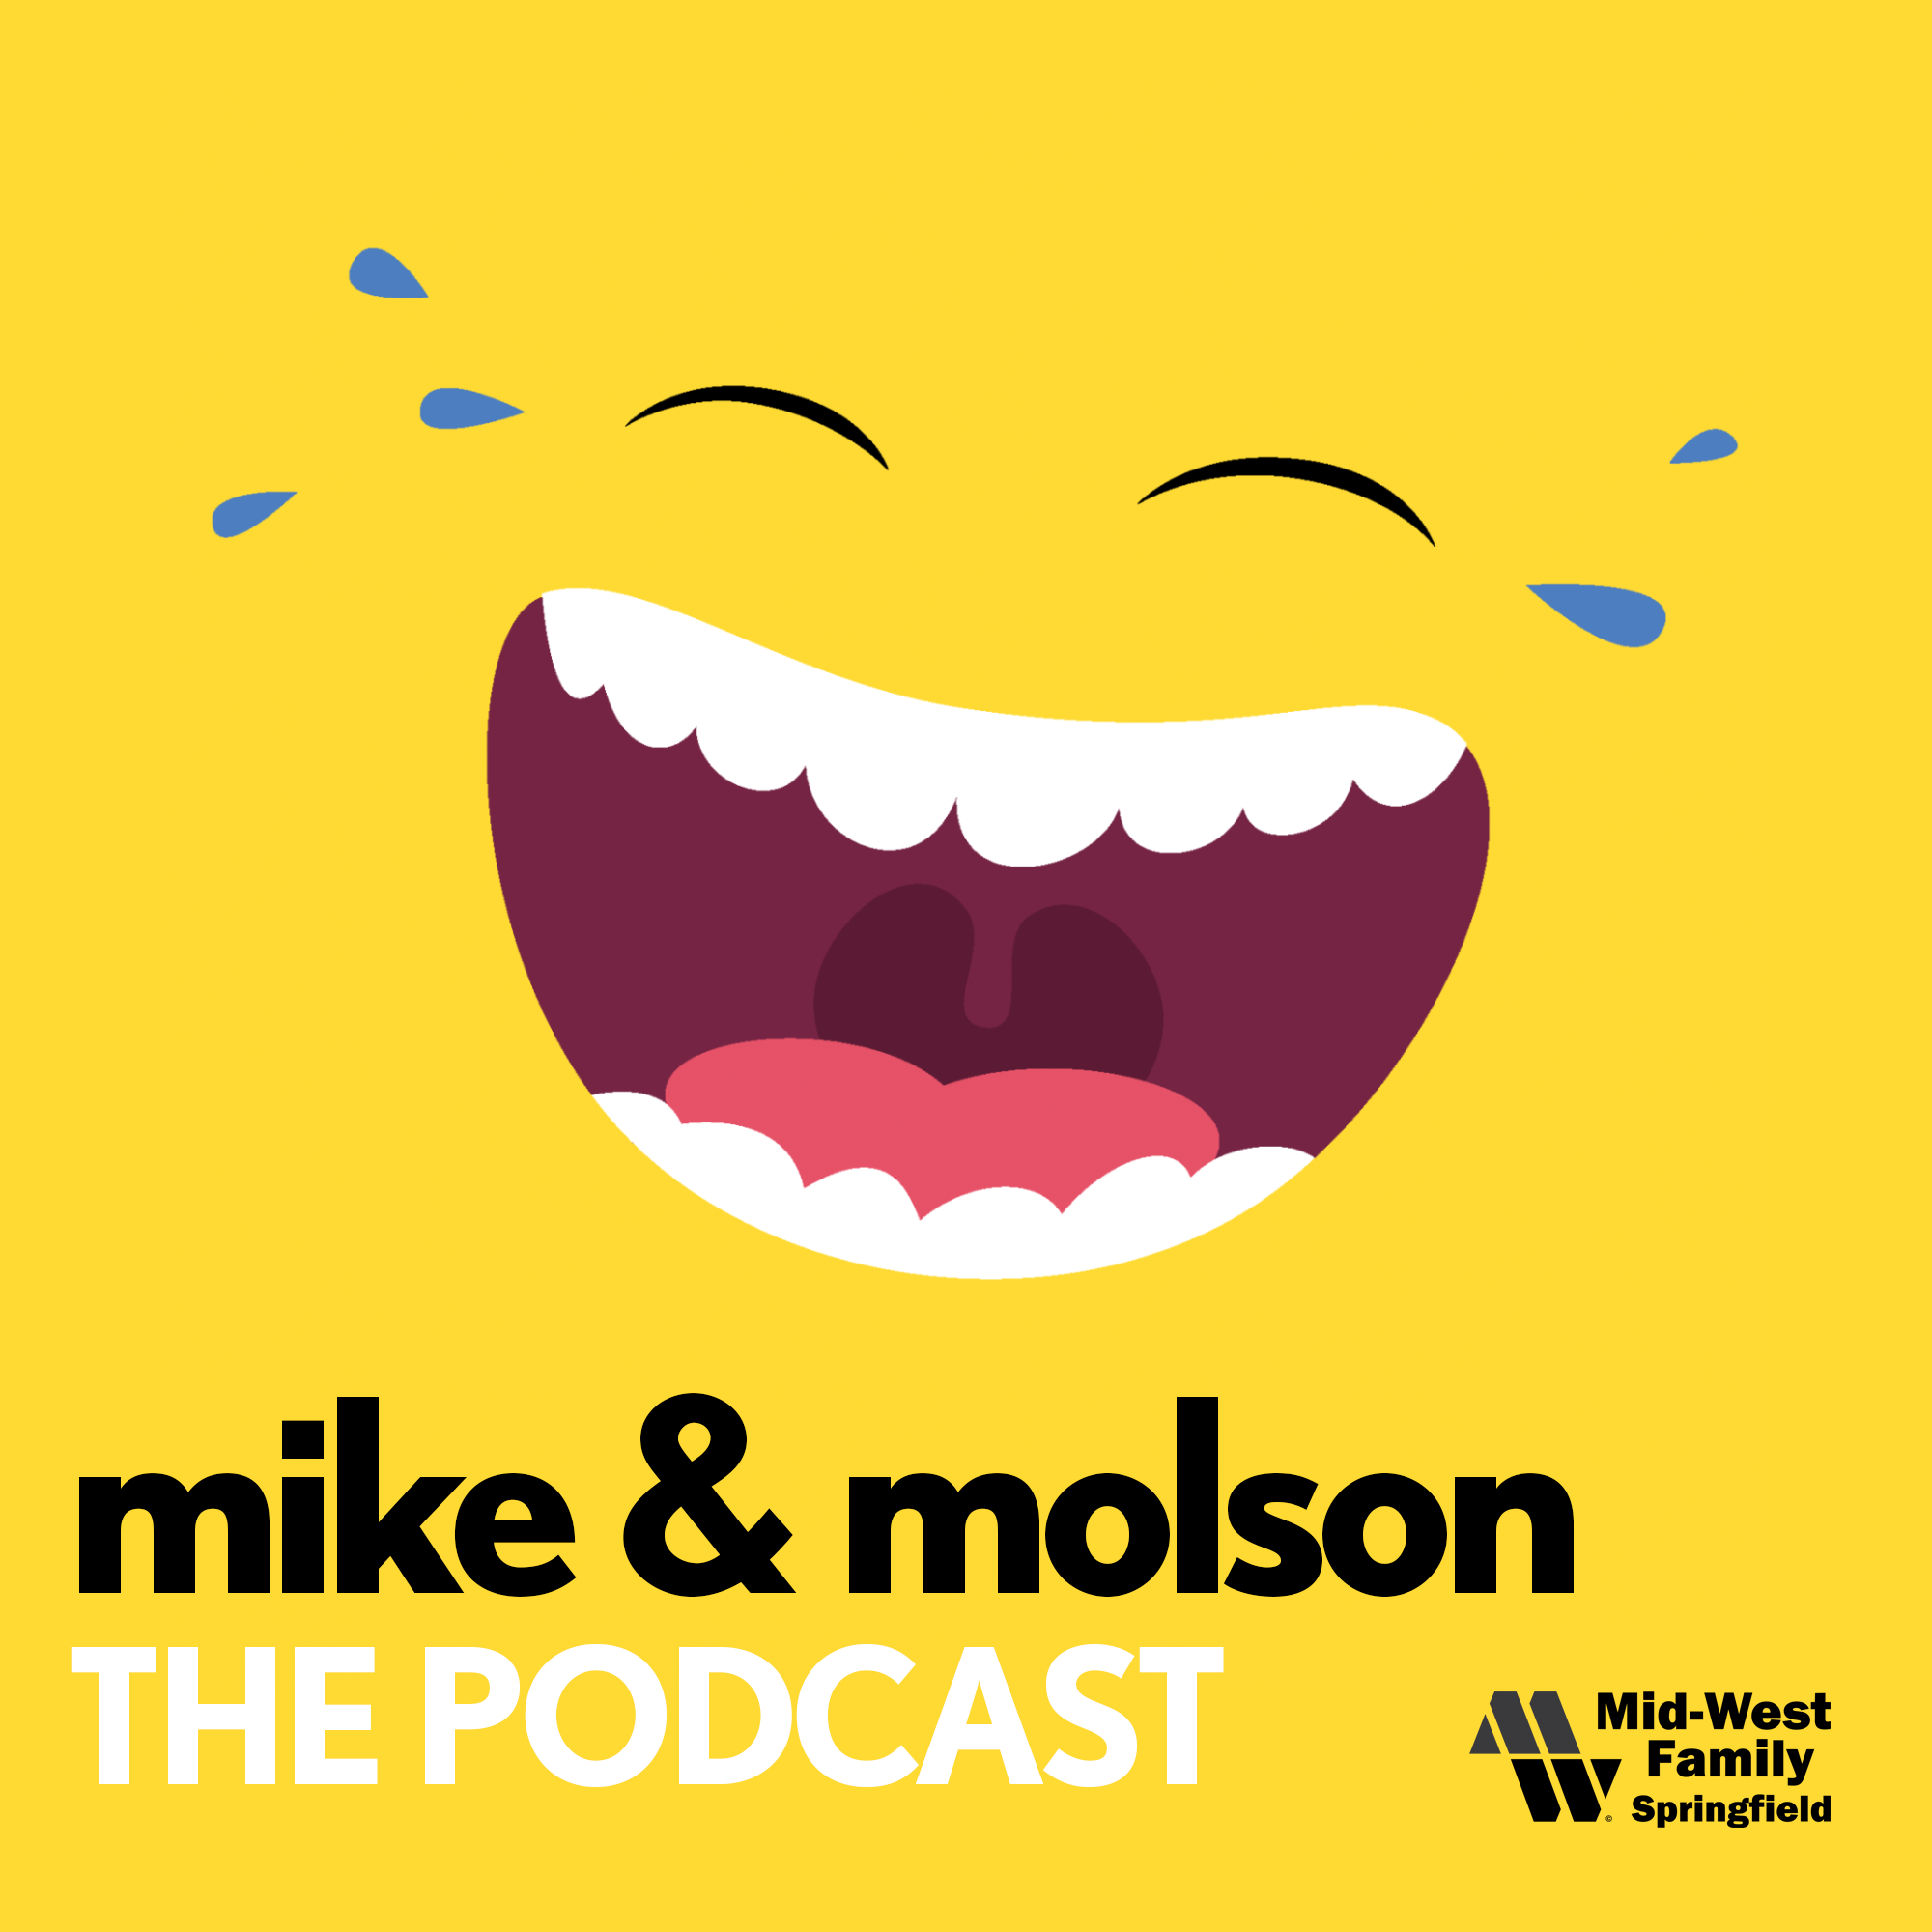 Mike & Molson Too Good For Radio Podcast Year 2 Episode 3 Russian Cheecake Killer